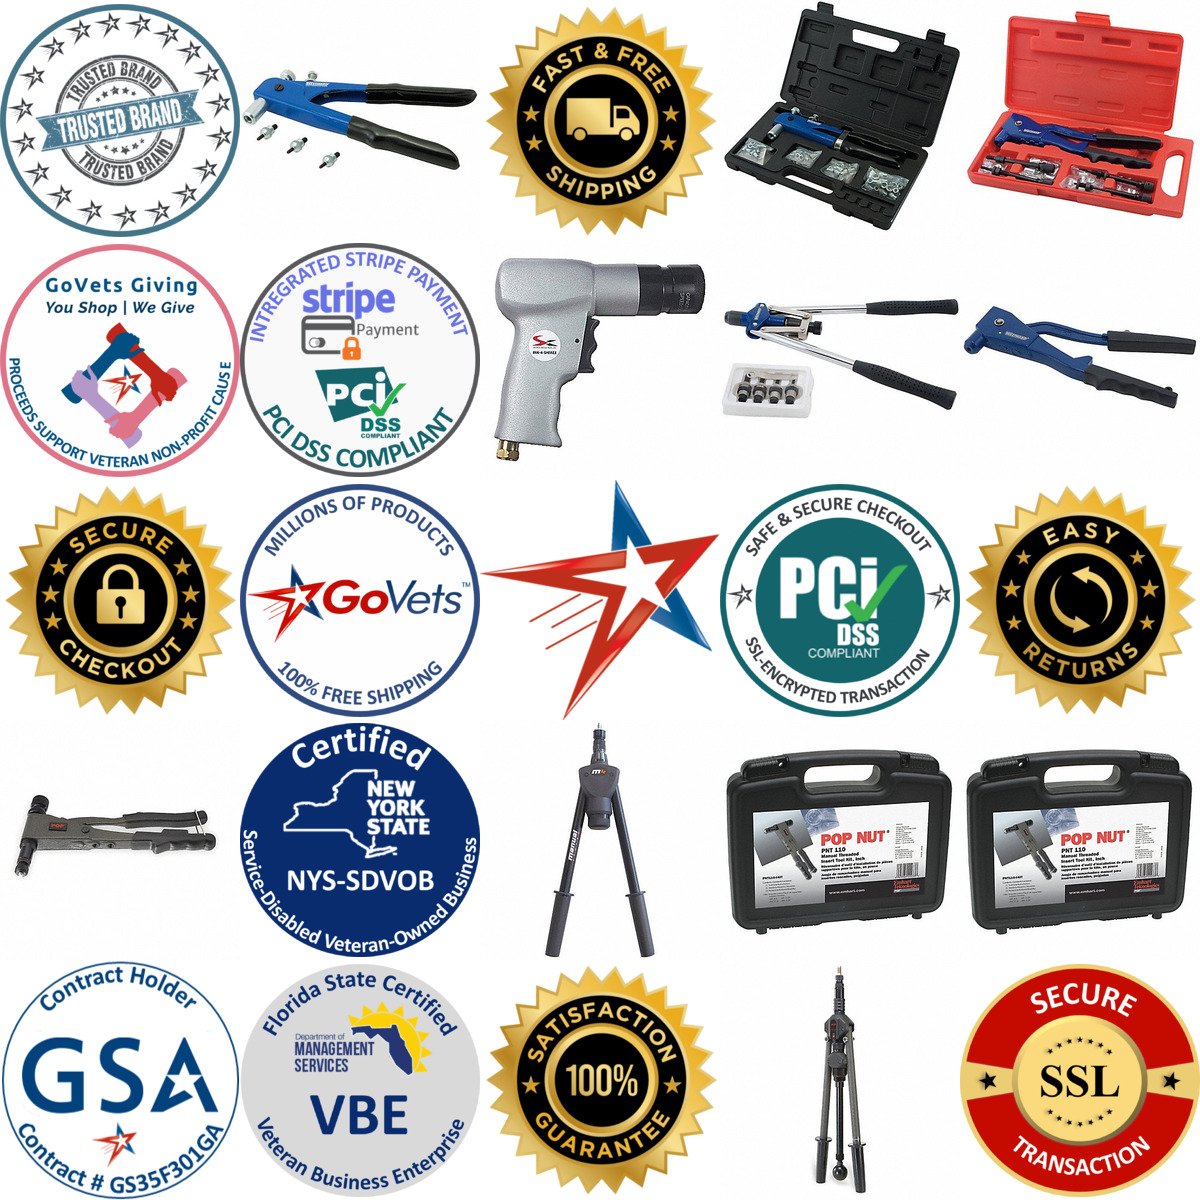 A selection of Rivet Nut Tools products on GoVets